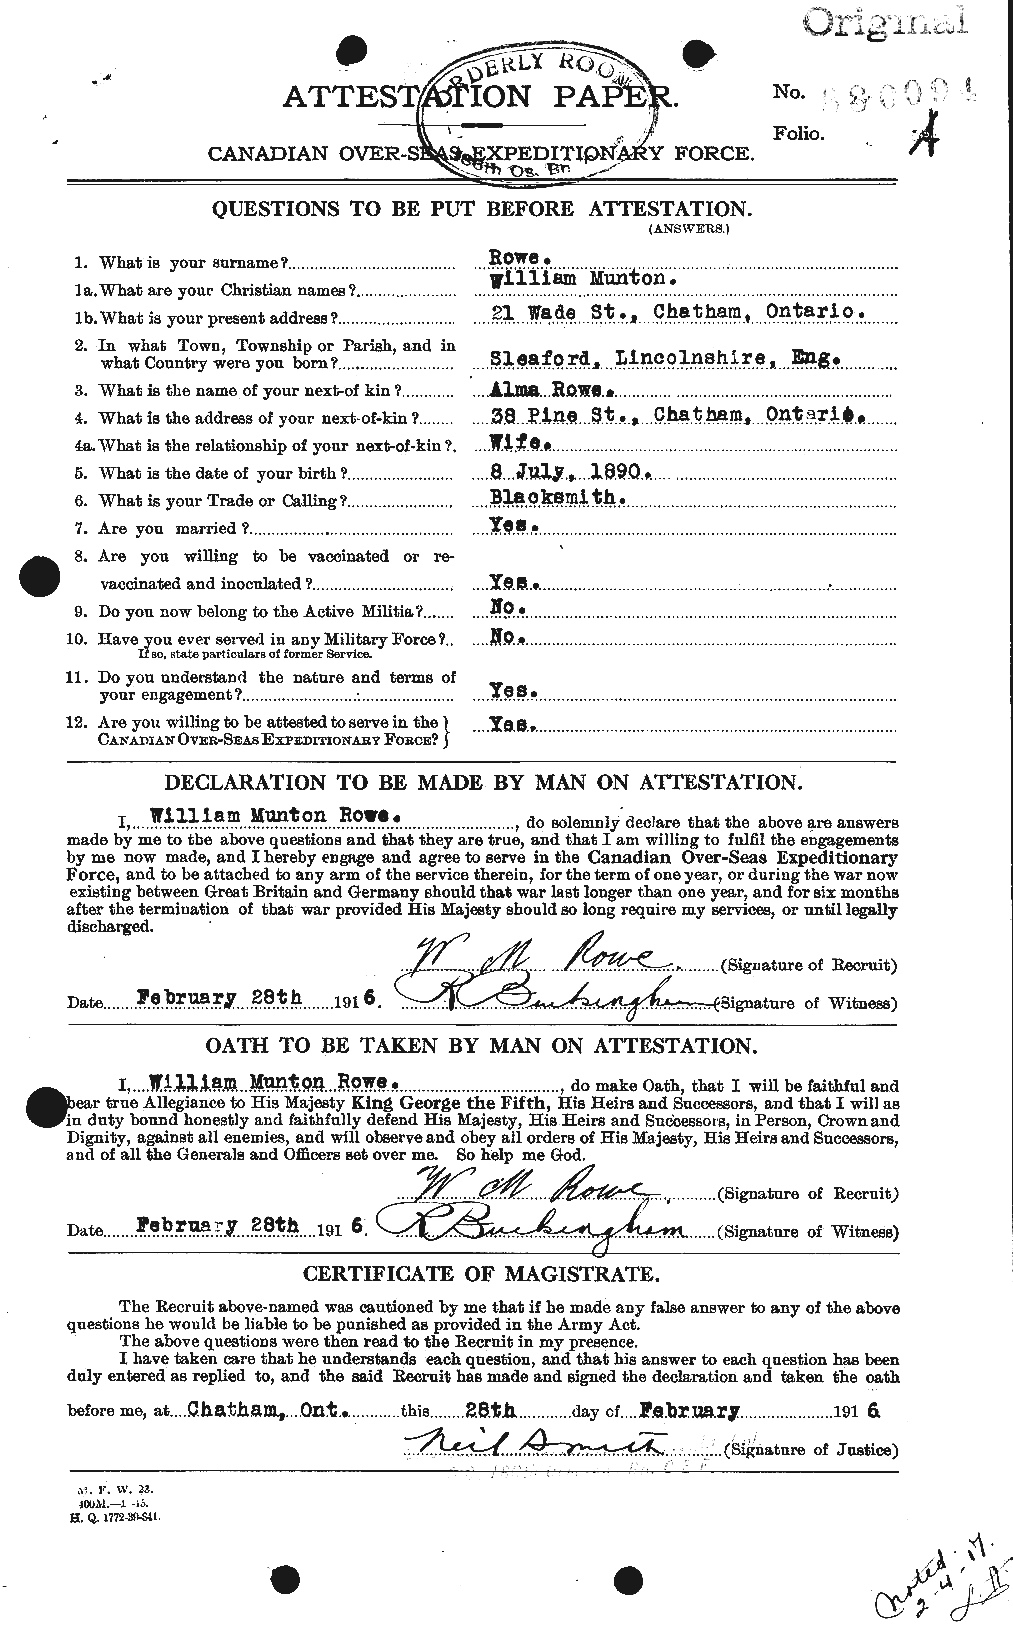 Personnel Records of the First World War - CEF 616040a